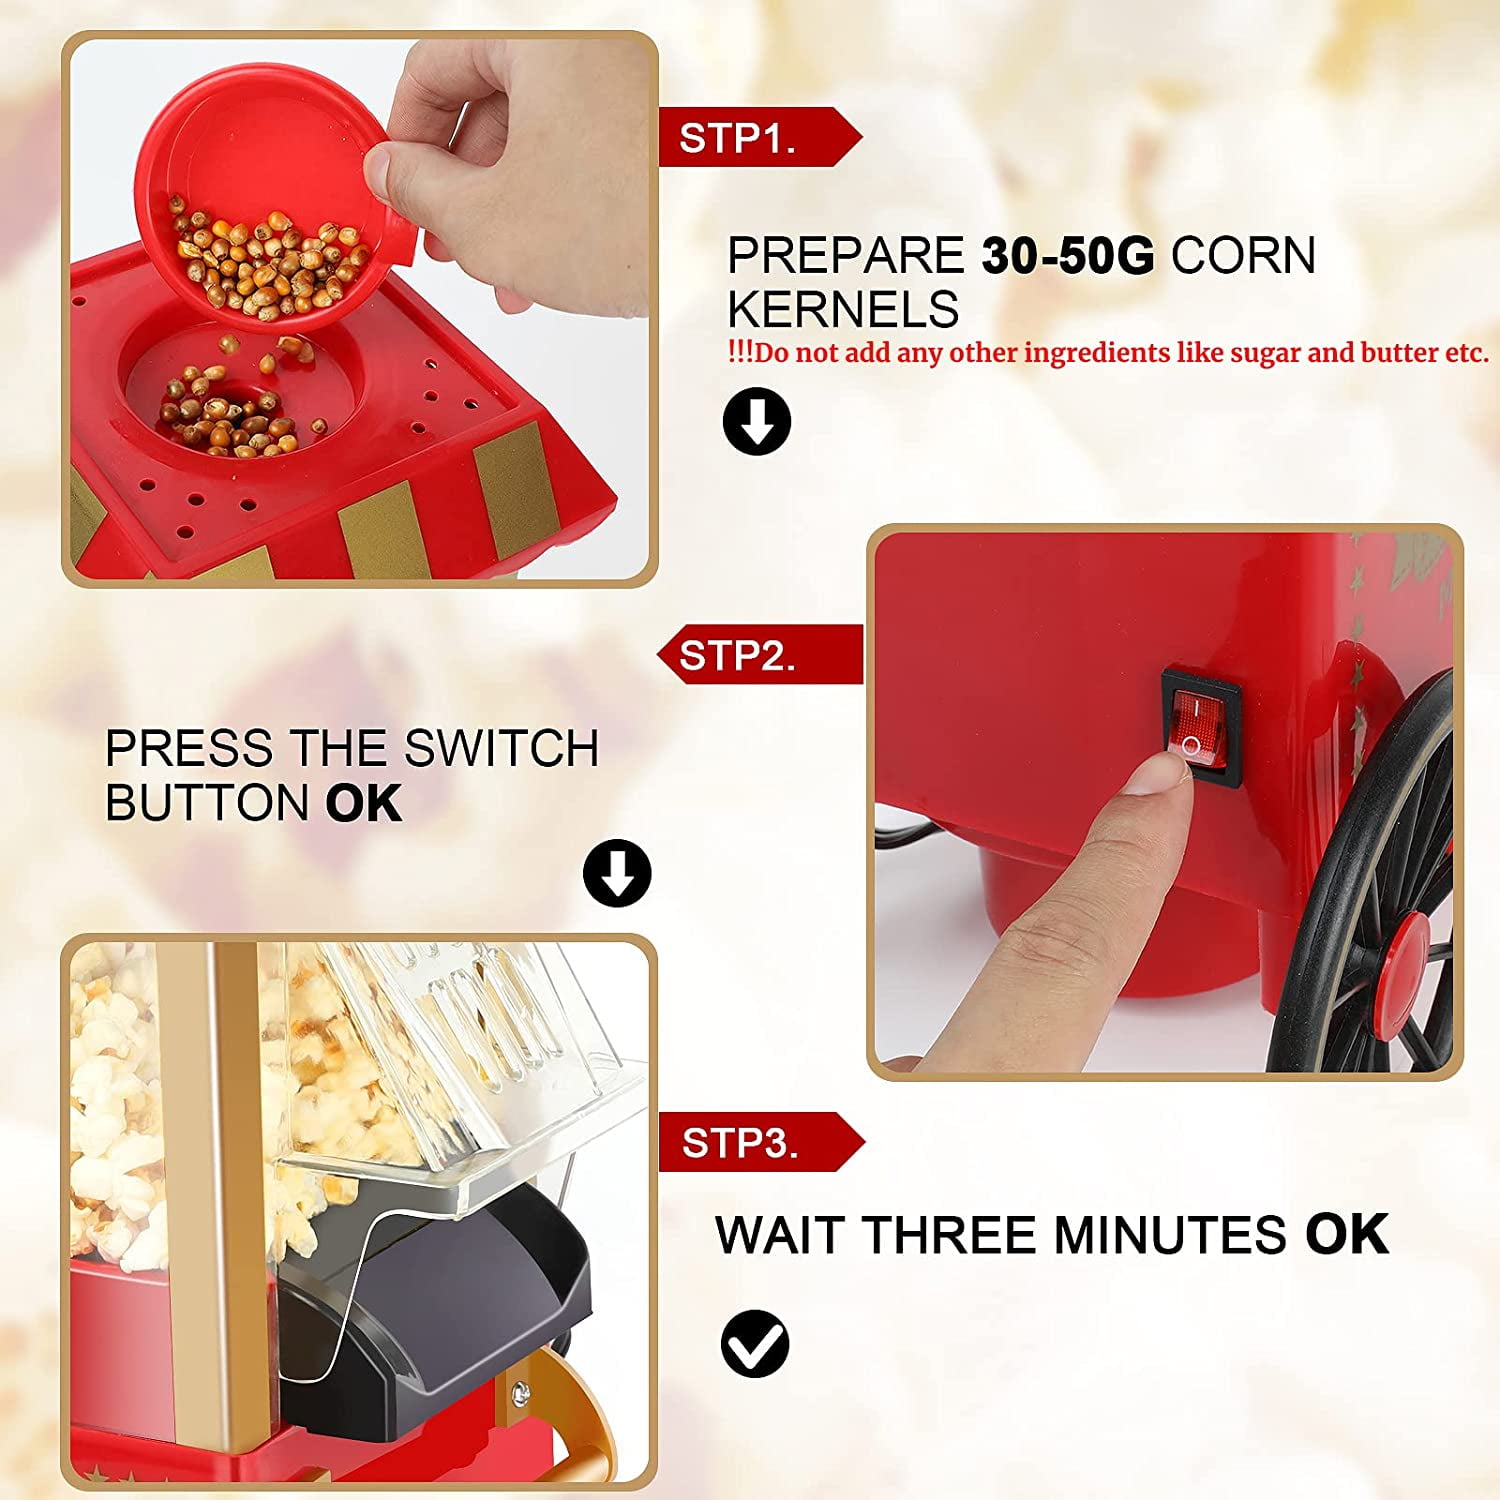  BHDK Hot Air Popcorn Machine, 1200W Red Retro Professional  Automatic Popcorn Cart with Measuring Spoon, Healthy Tabletop Popcorn  Maker, Household Corn Popper for Party Movie Nights Birthday Gift(US): Home  & Kitchen